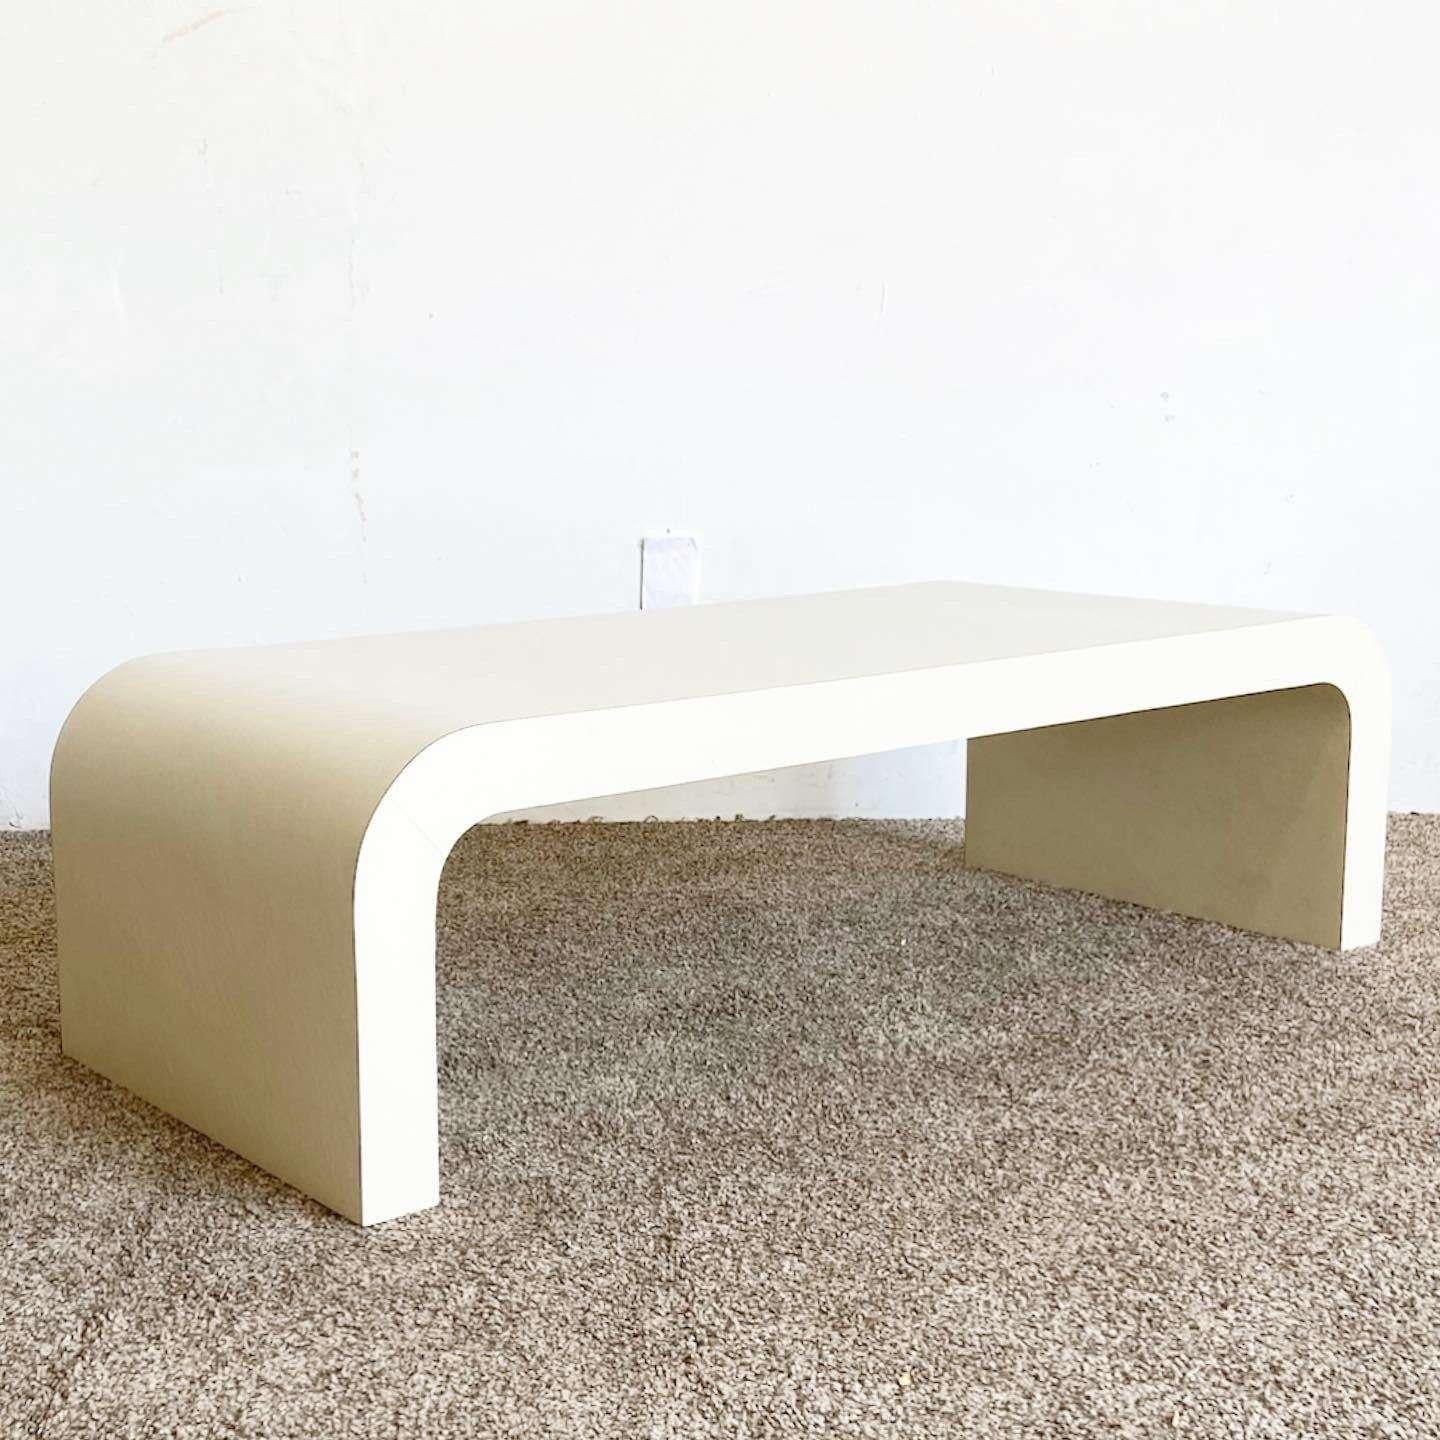 Exceptional vintage postmodern waterfall coffee table. Feature a textured faux leather cream laminate.